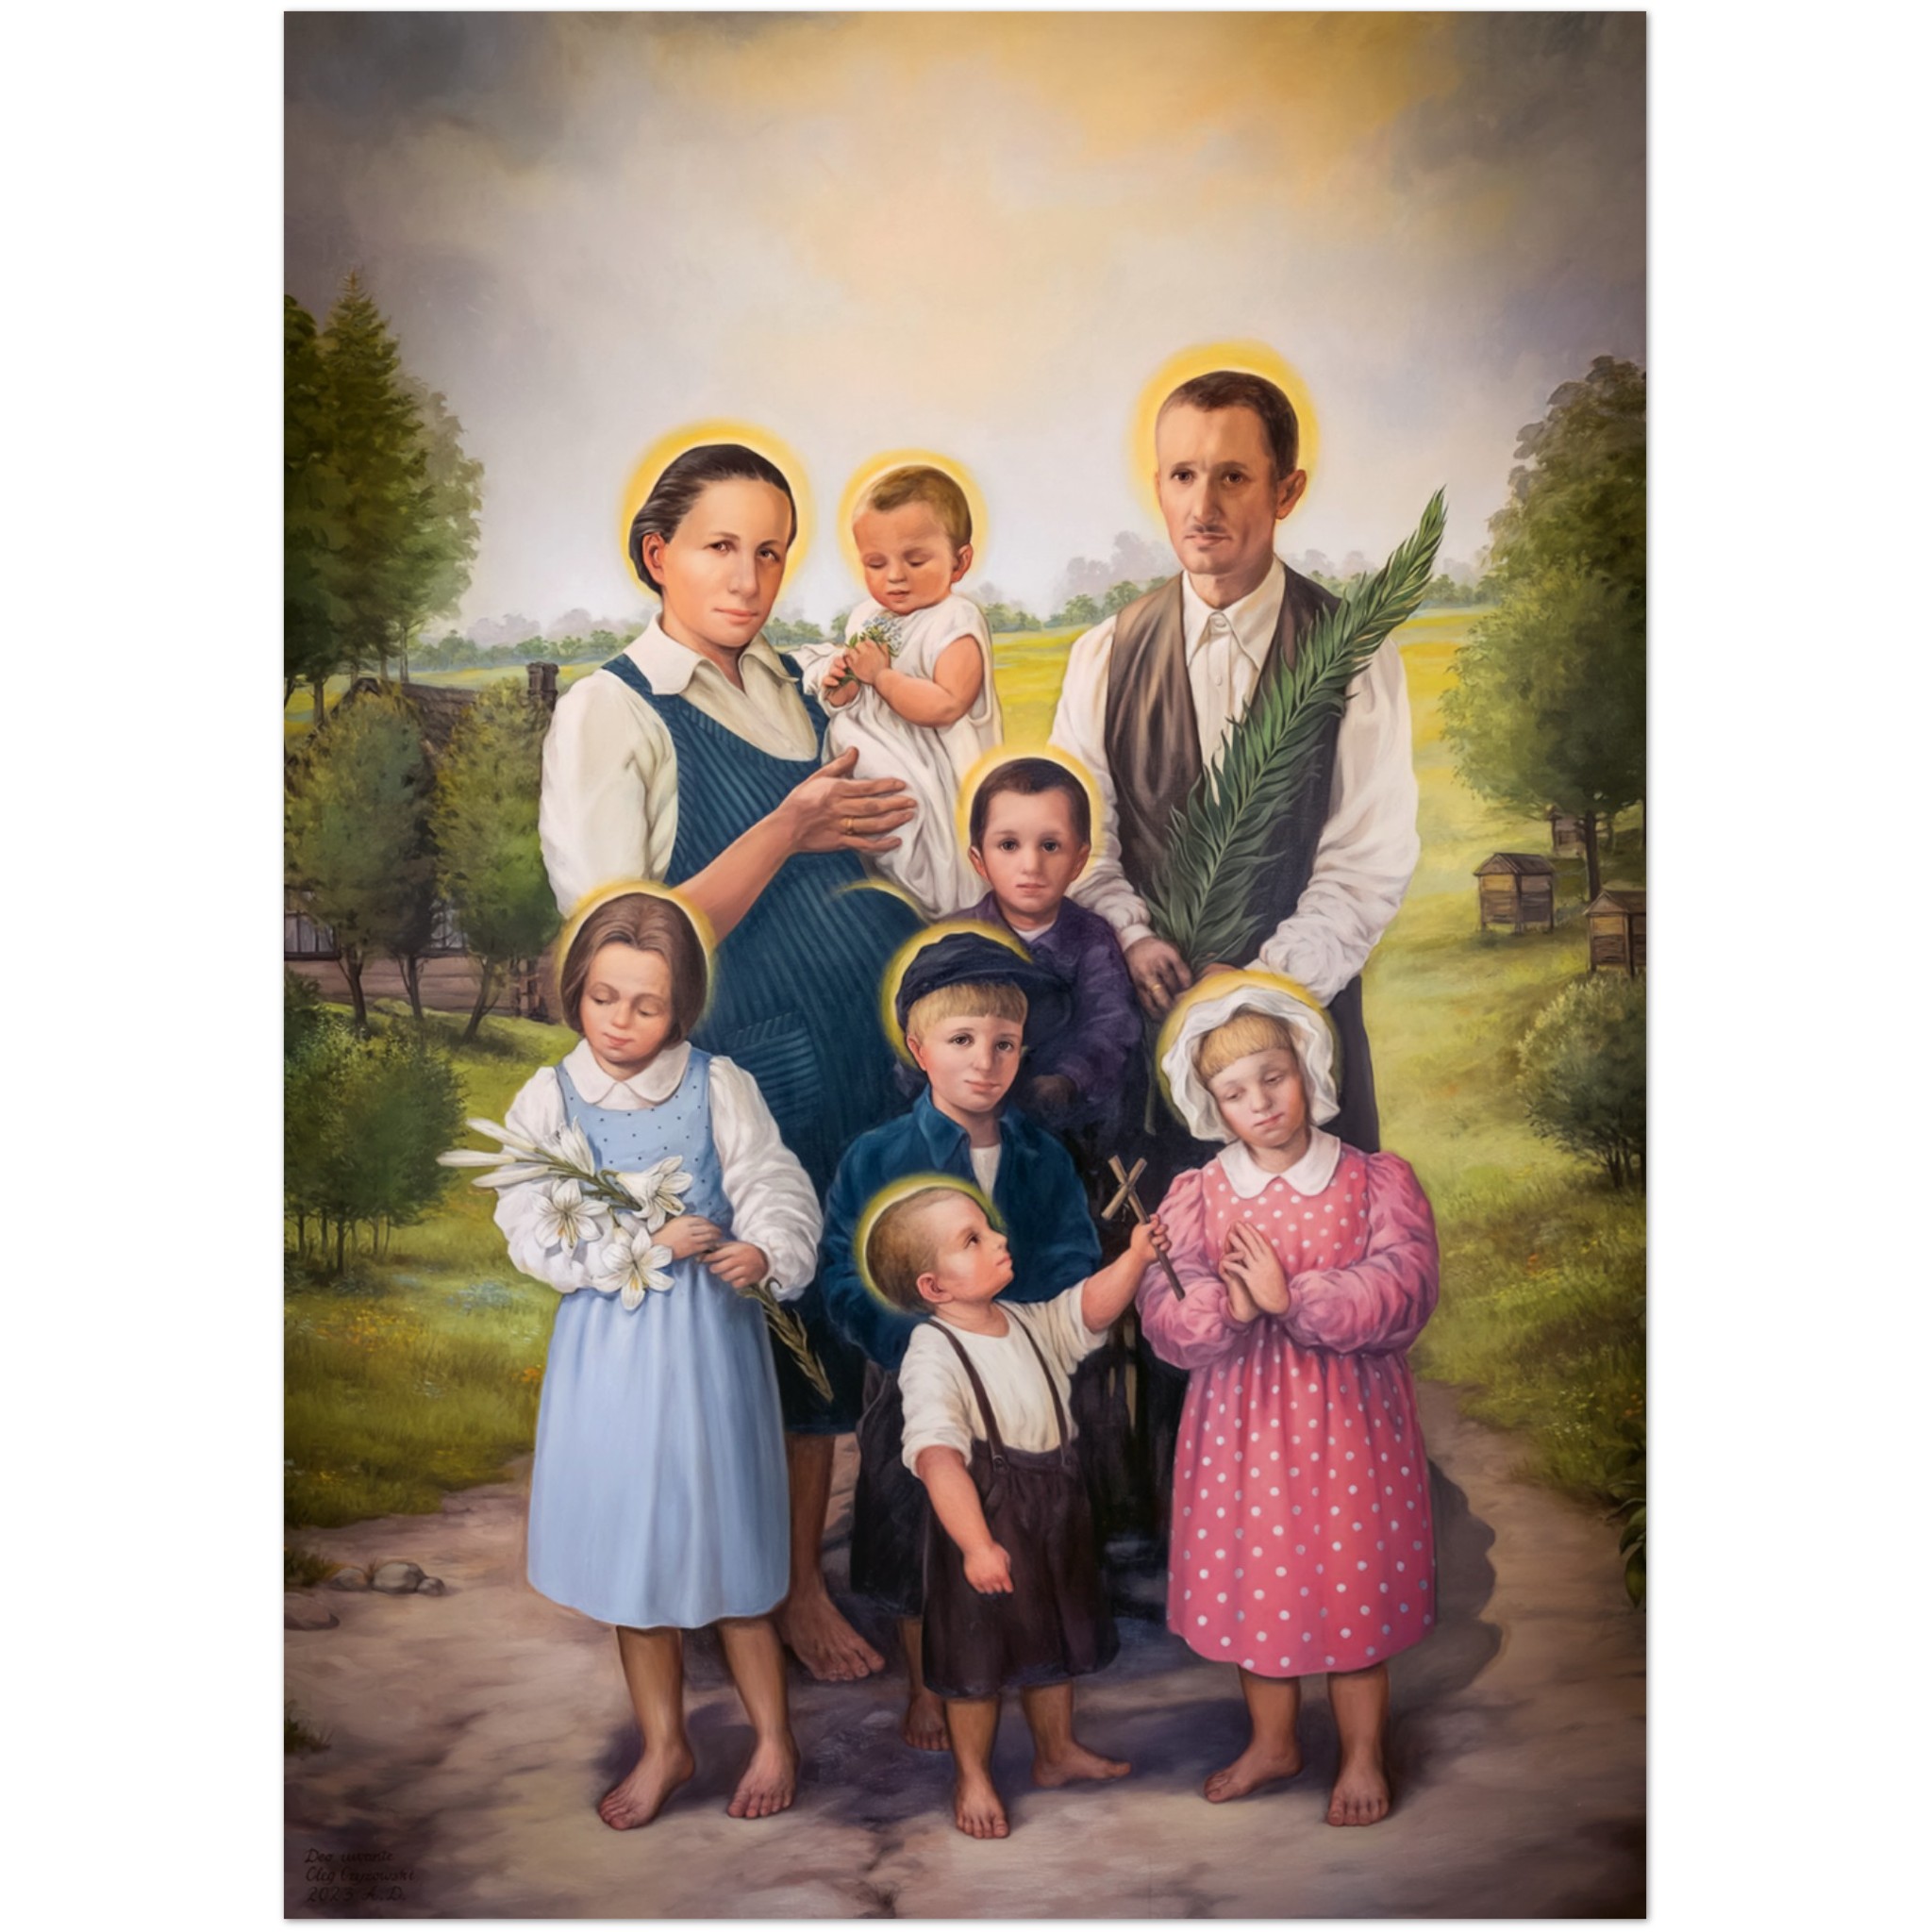 Ulma Family – 10 copies Silk Paper Print – Poland – Martyred and Blessed Together Wall Art Rosary.Team